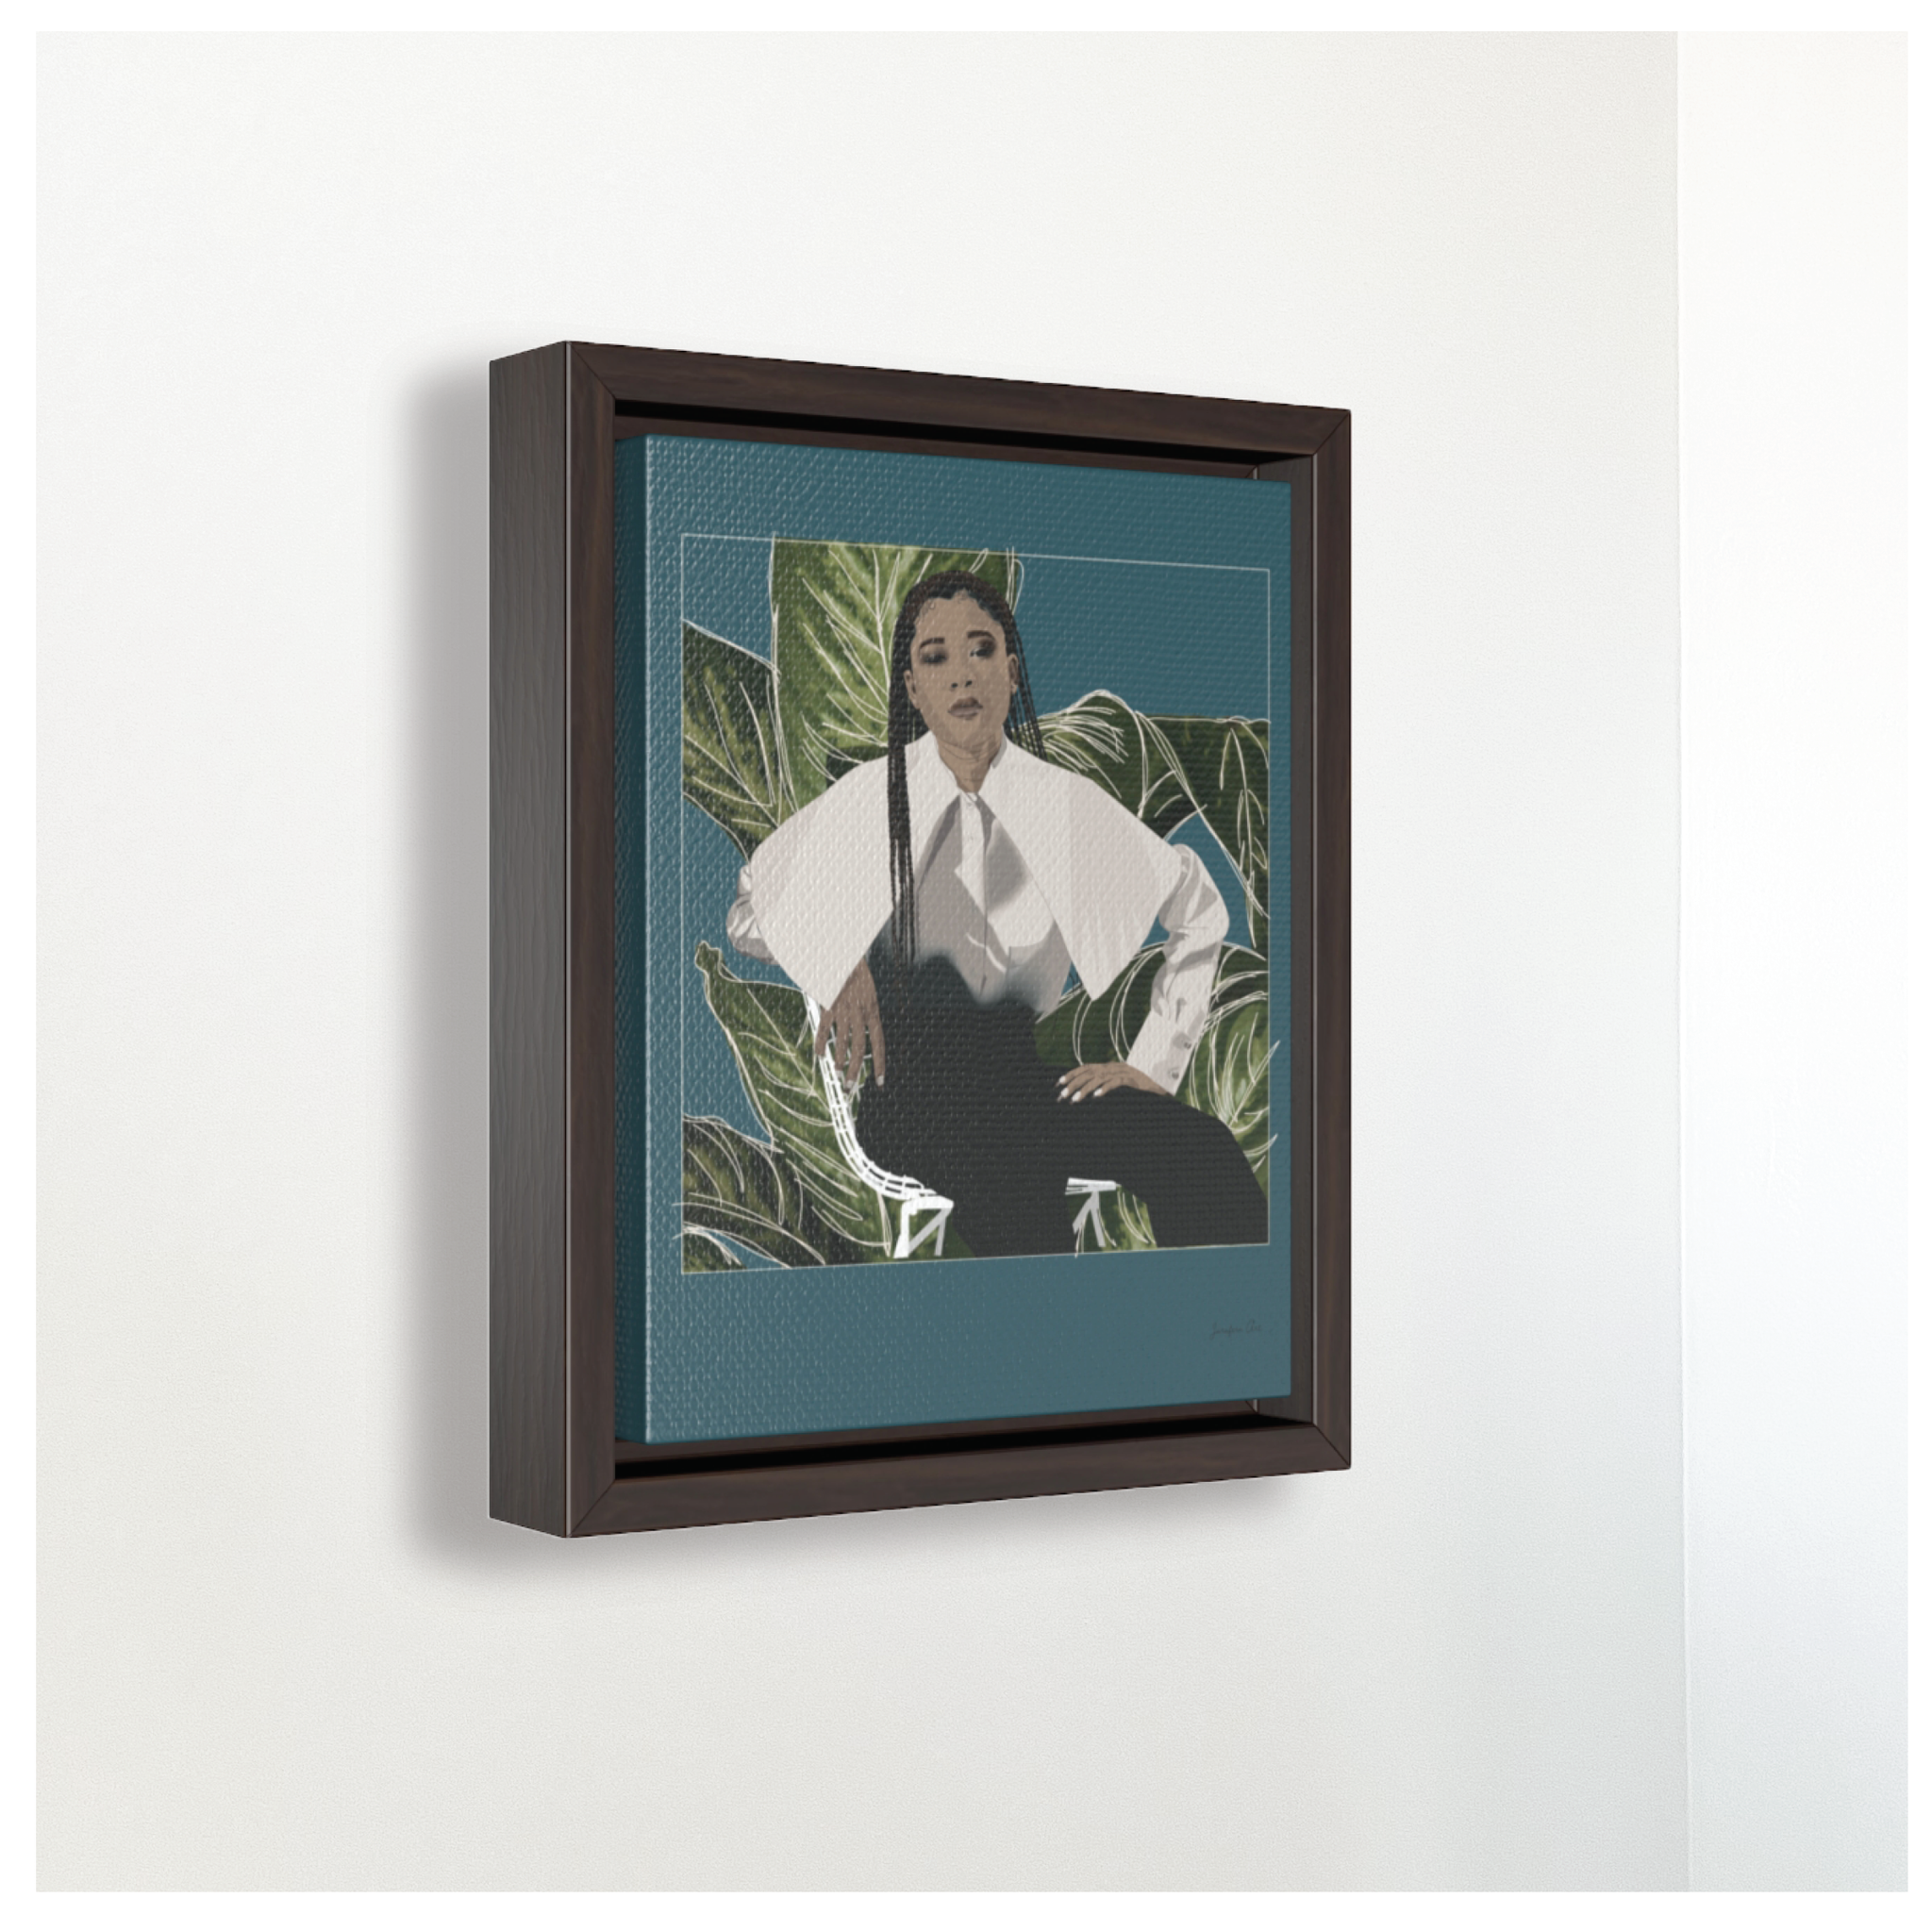 A small framed canvas illustration with a teal background and a digital illustration of actress Storm Reid posing in a chair and wearing a white blouse and black trousers, with a cut-out photo of leaves behind her